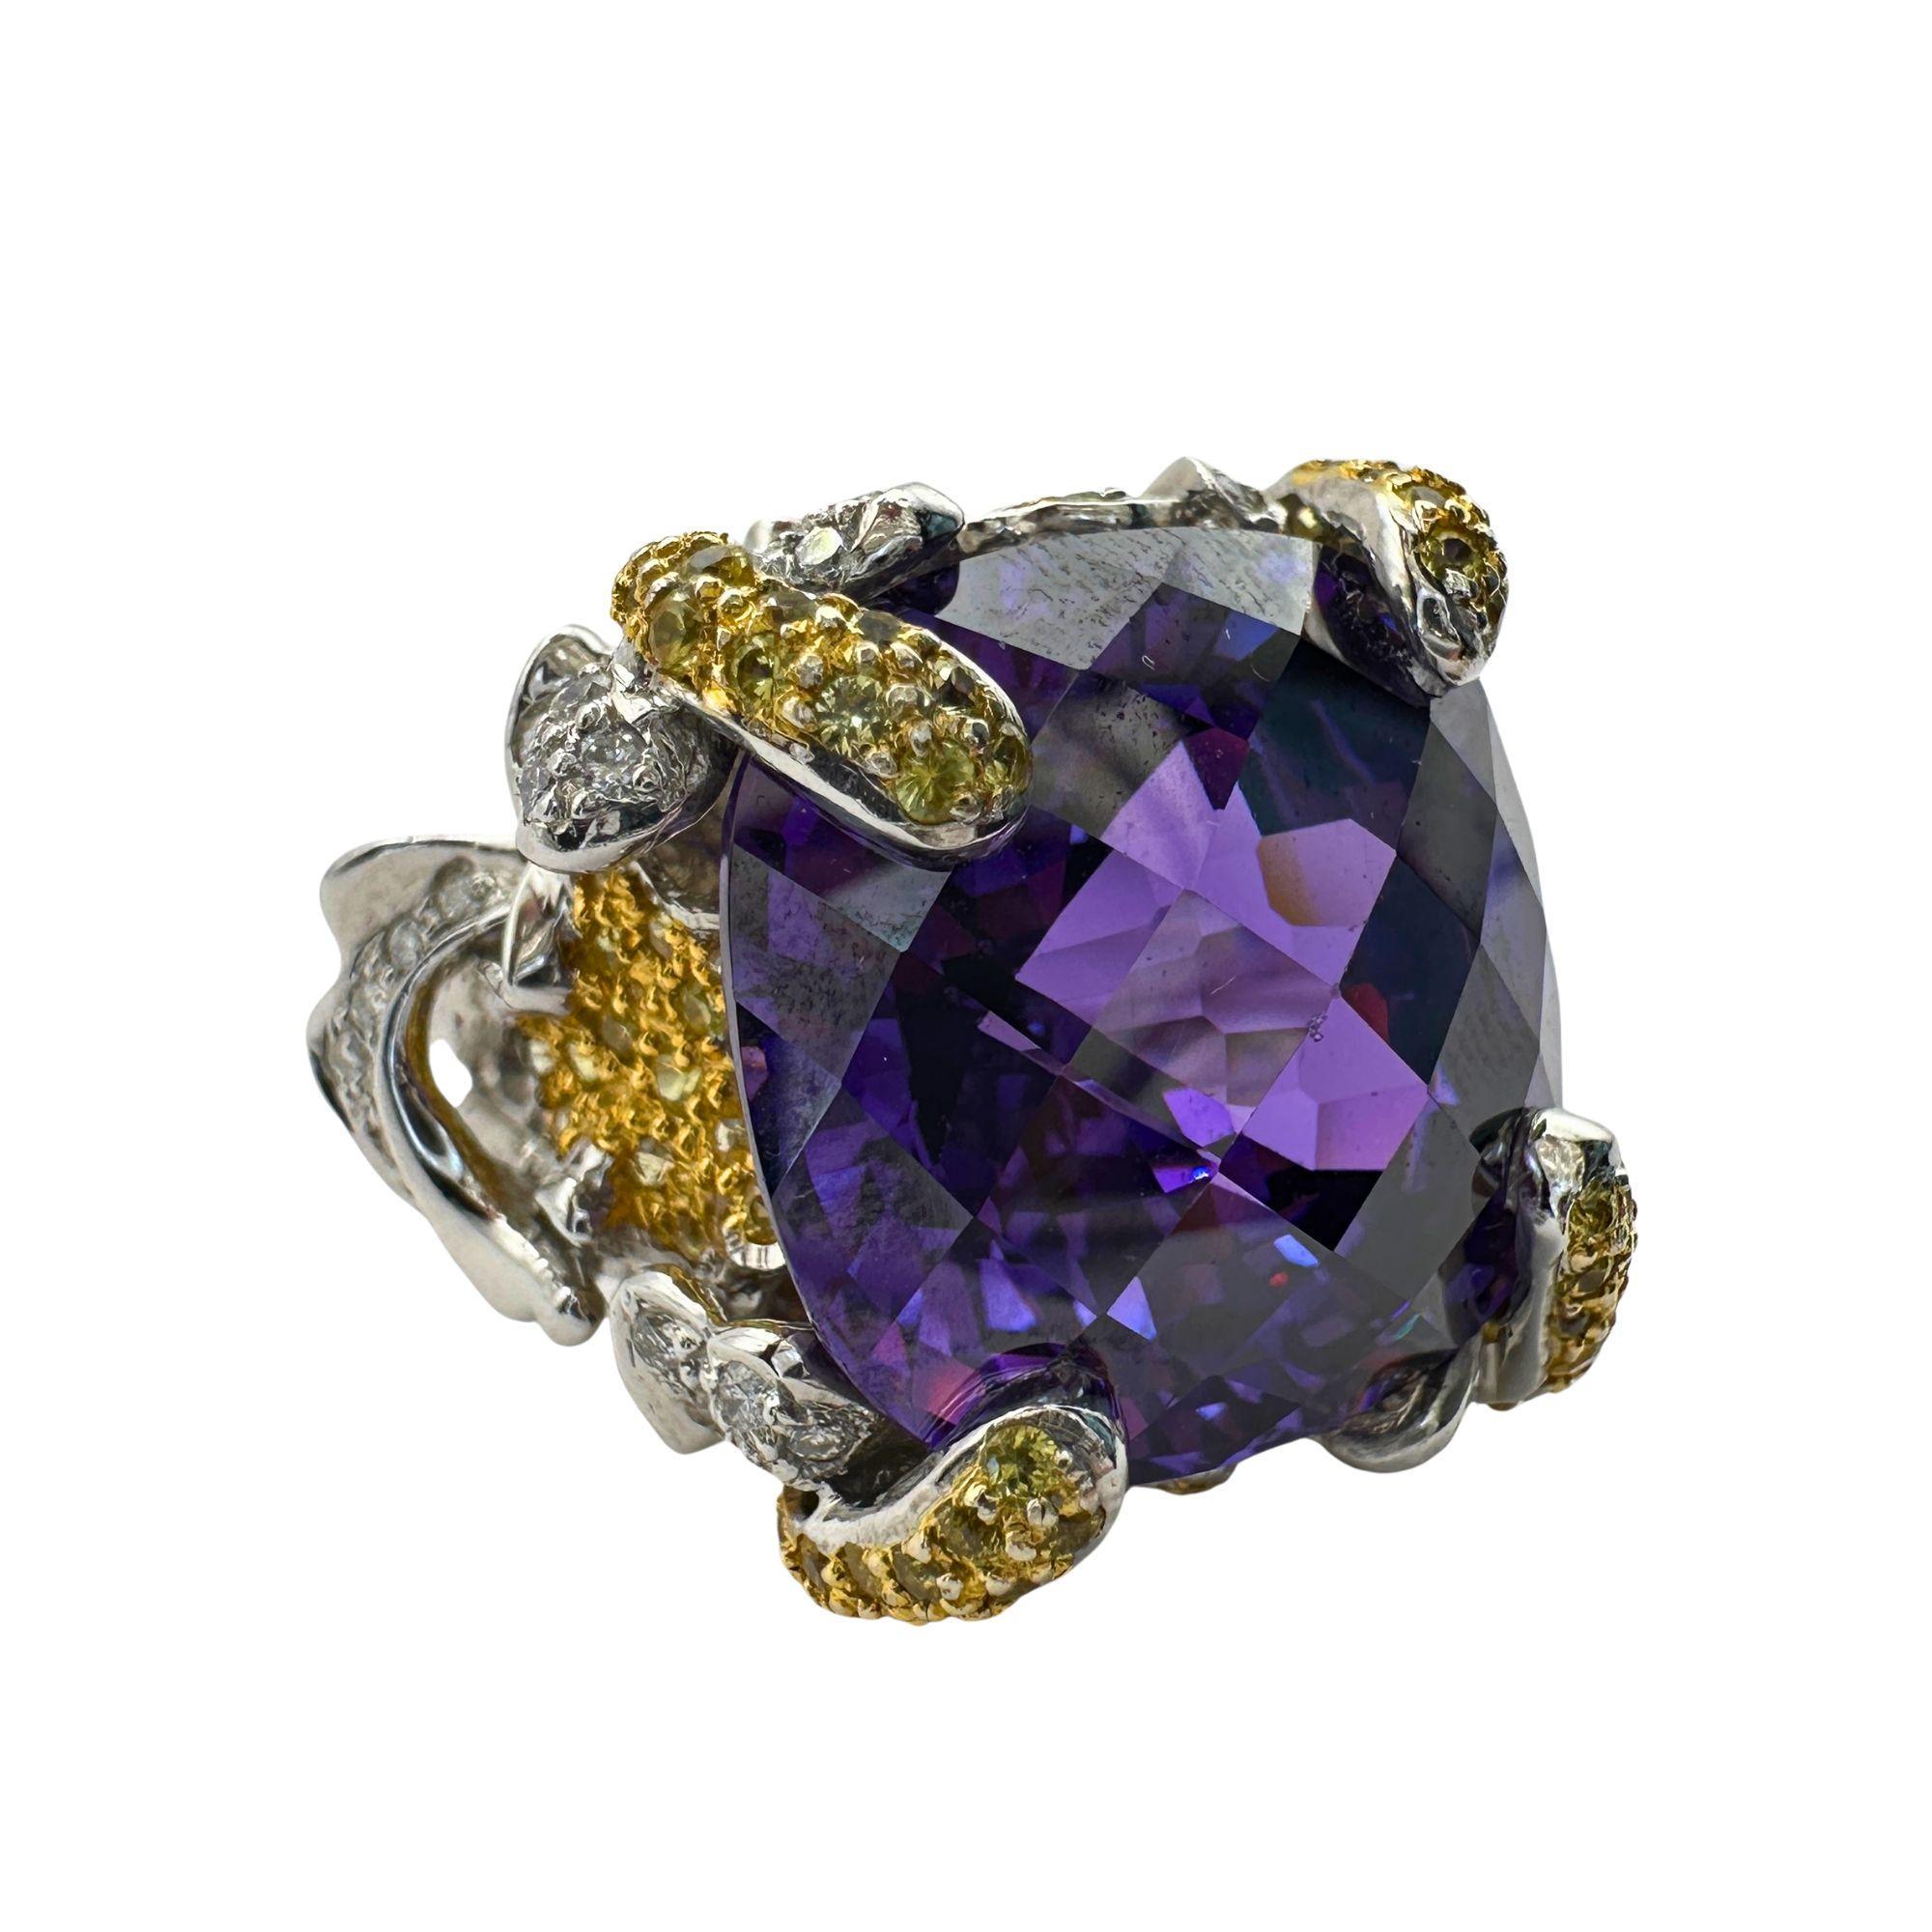 Indulge in luxury with our 14k Diamond and Yellow Sapphire and Purple Stone Center Cocktail Ring. Crafted in 14k White Gold, this exquisite ring boasts a total of 0.74 carats of sparkling diamonds, 1.08 carats of vibrant yellow sapphires, and a